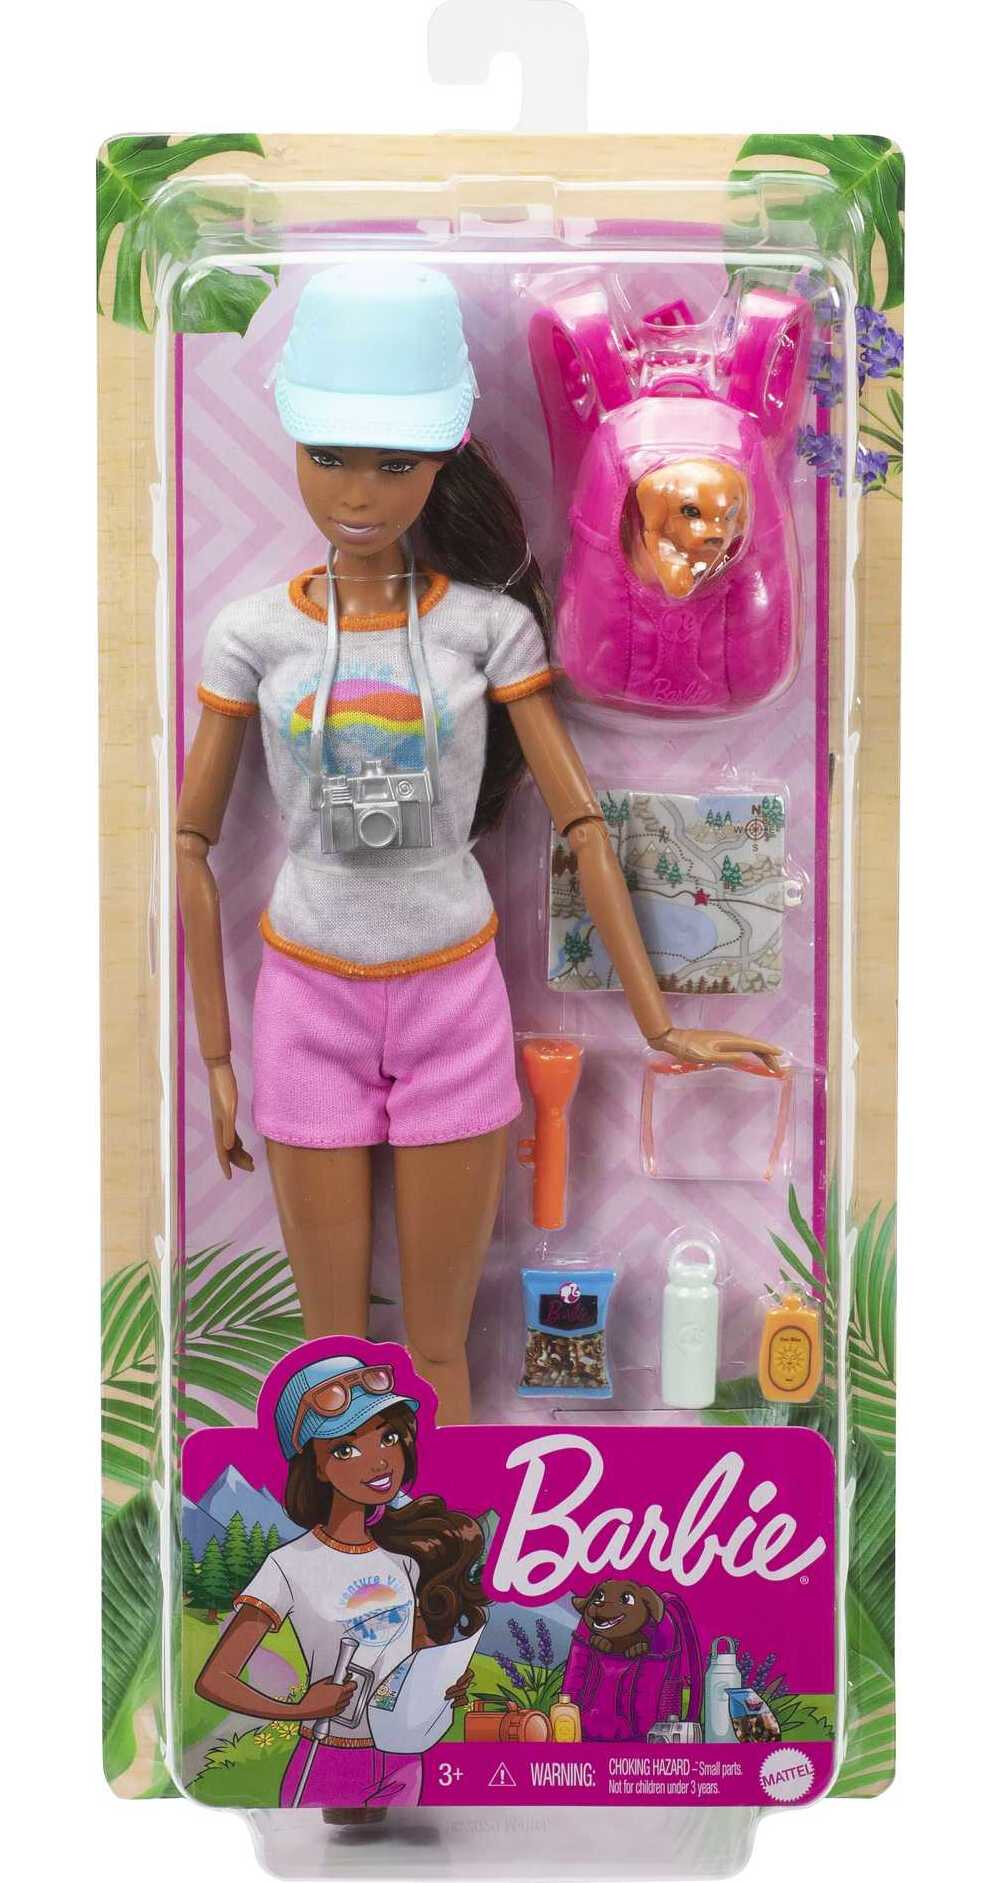 Barbie Hiking Doll with 9 Accessories Including Puppy, Backpack, Map & More, Brunette Doll - image 5 of 5